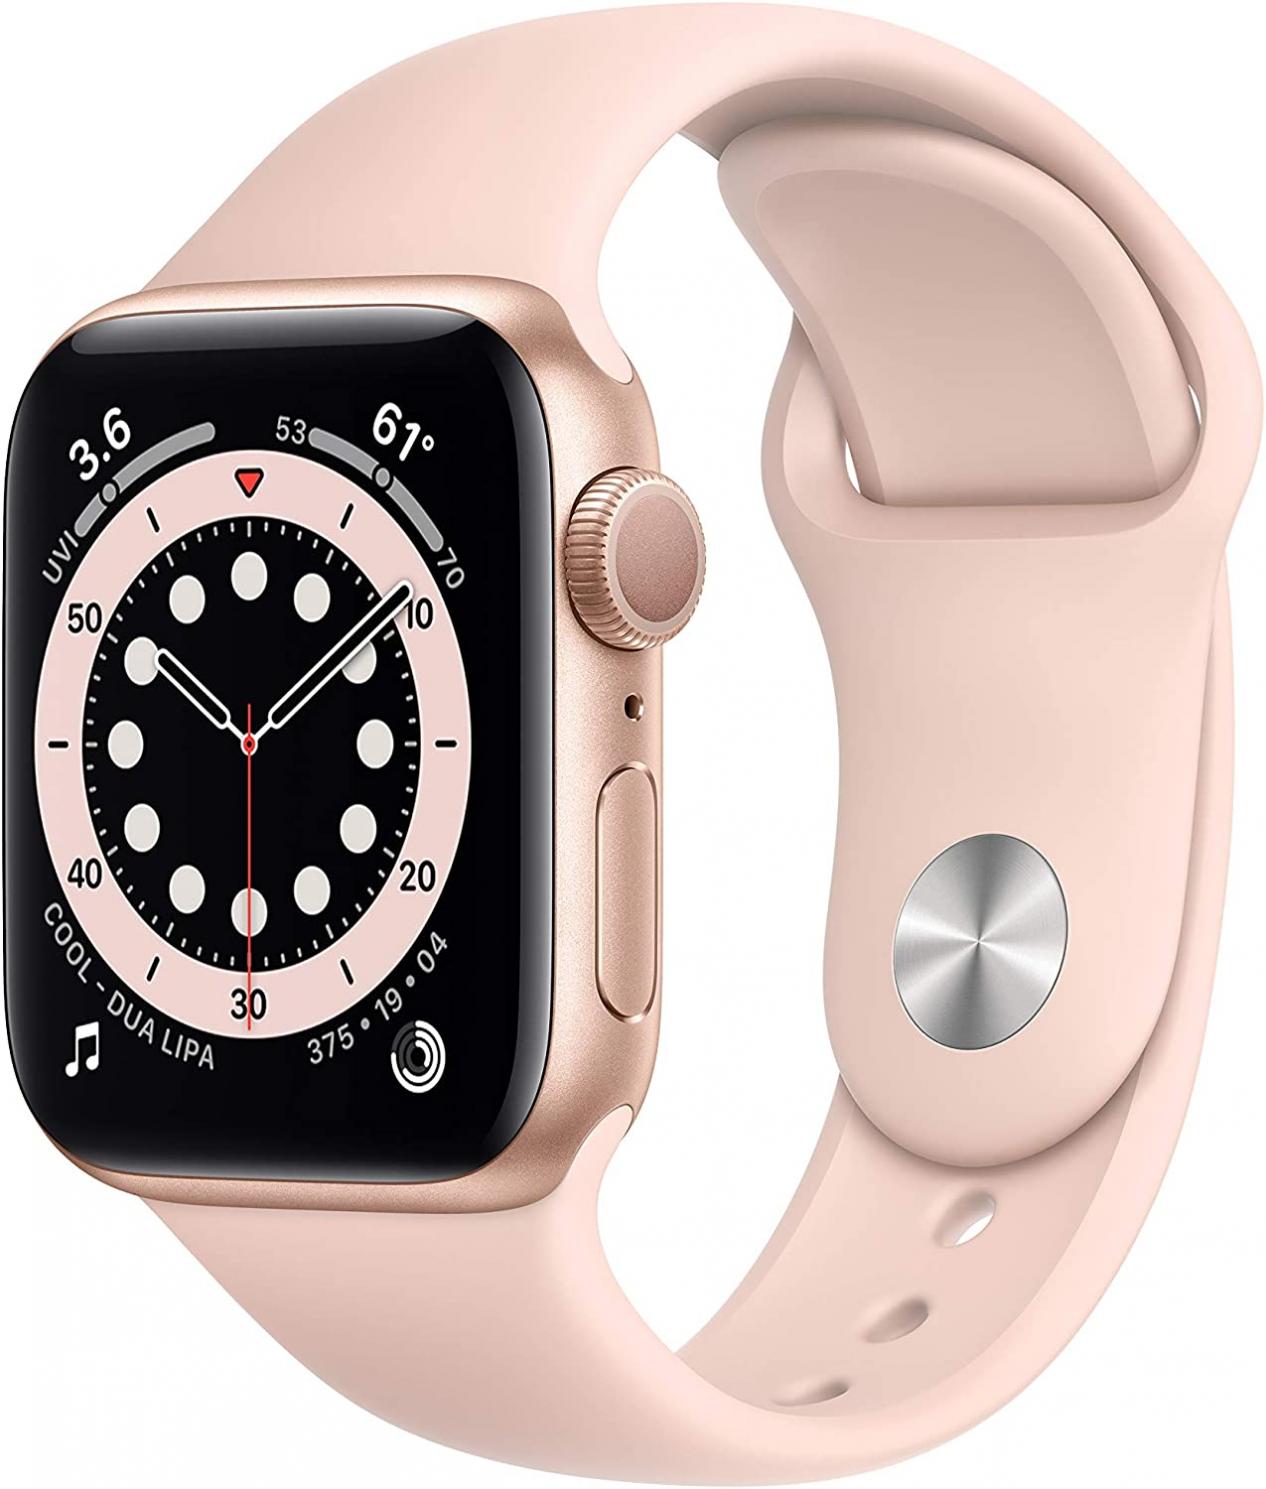 Apple Watch Series 6 (GPS, 40mm) - Gold Aluminum Case with Pink Sand Sport Band